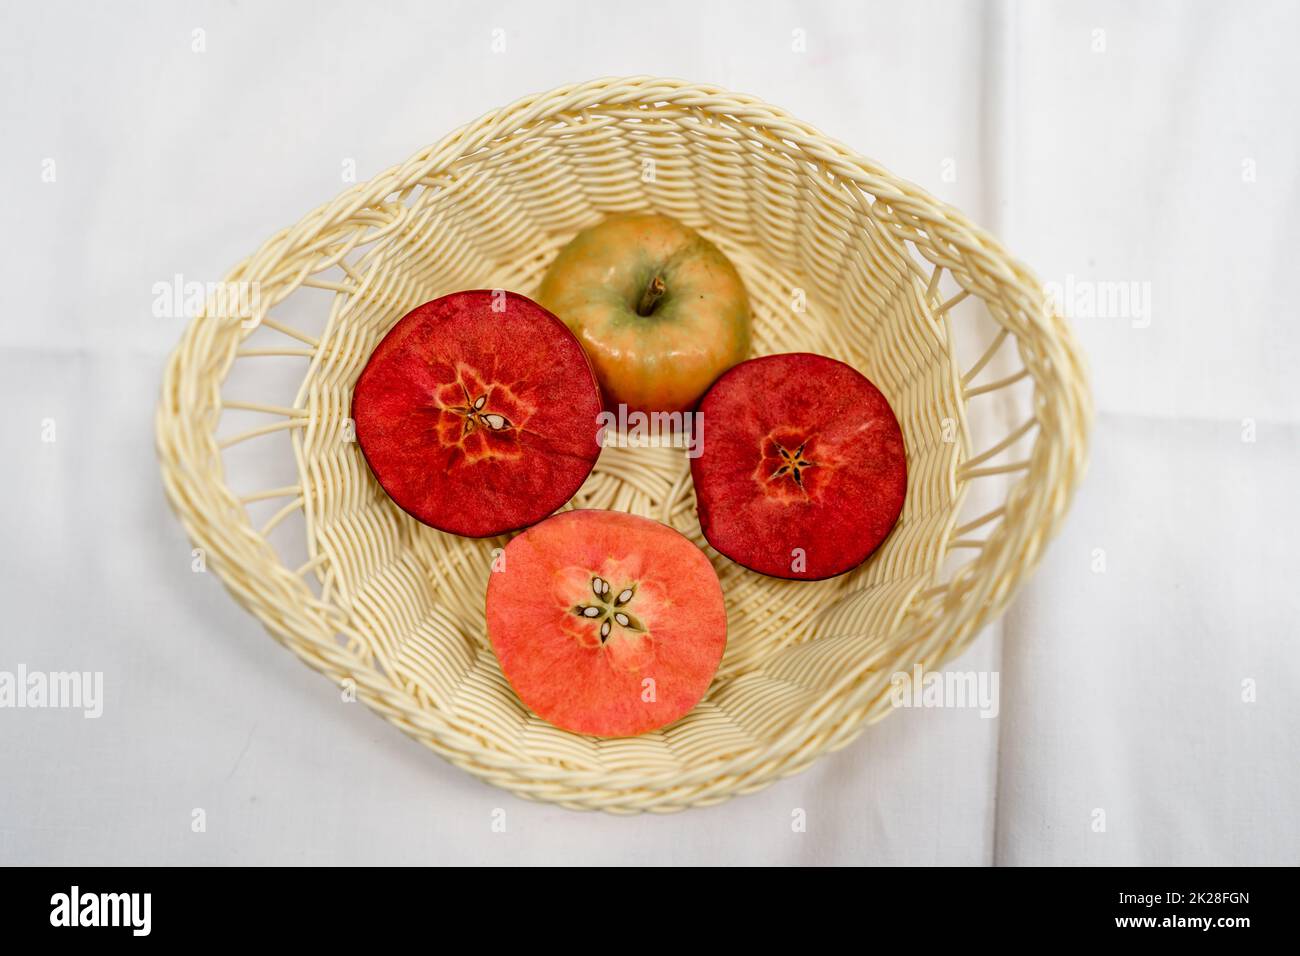 apples with genetic modification of different colors Stock Photo